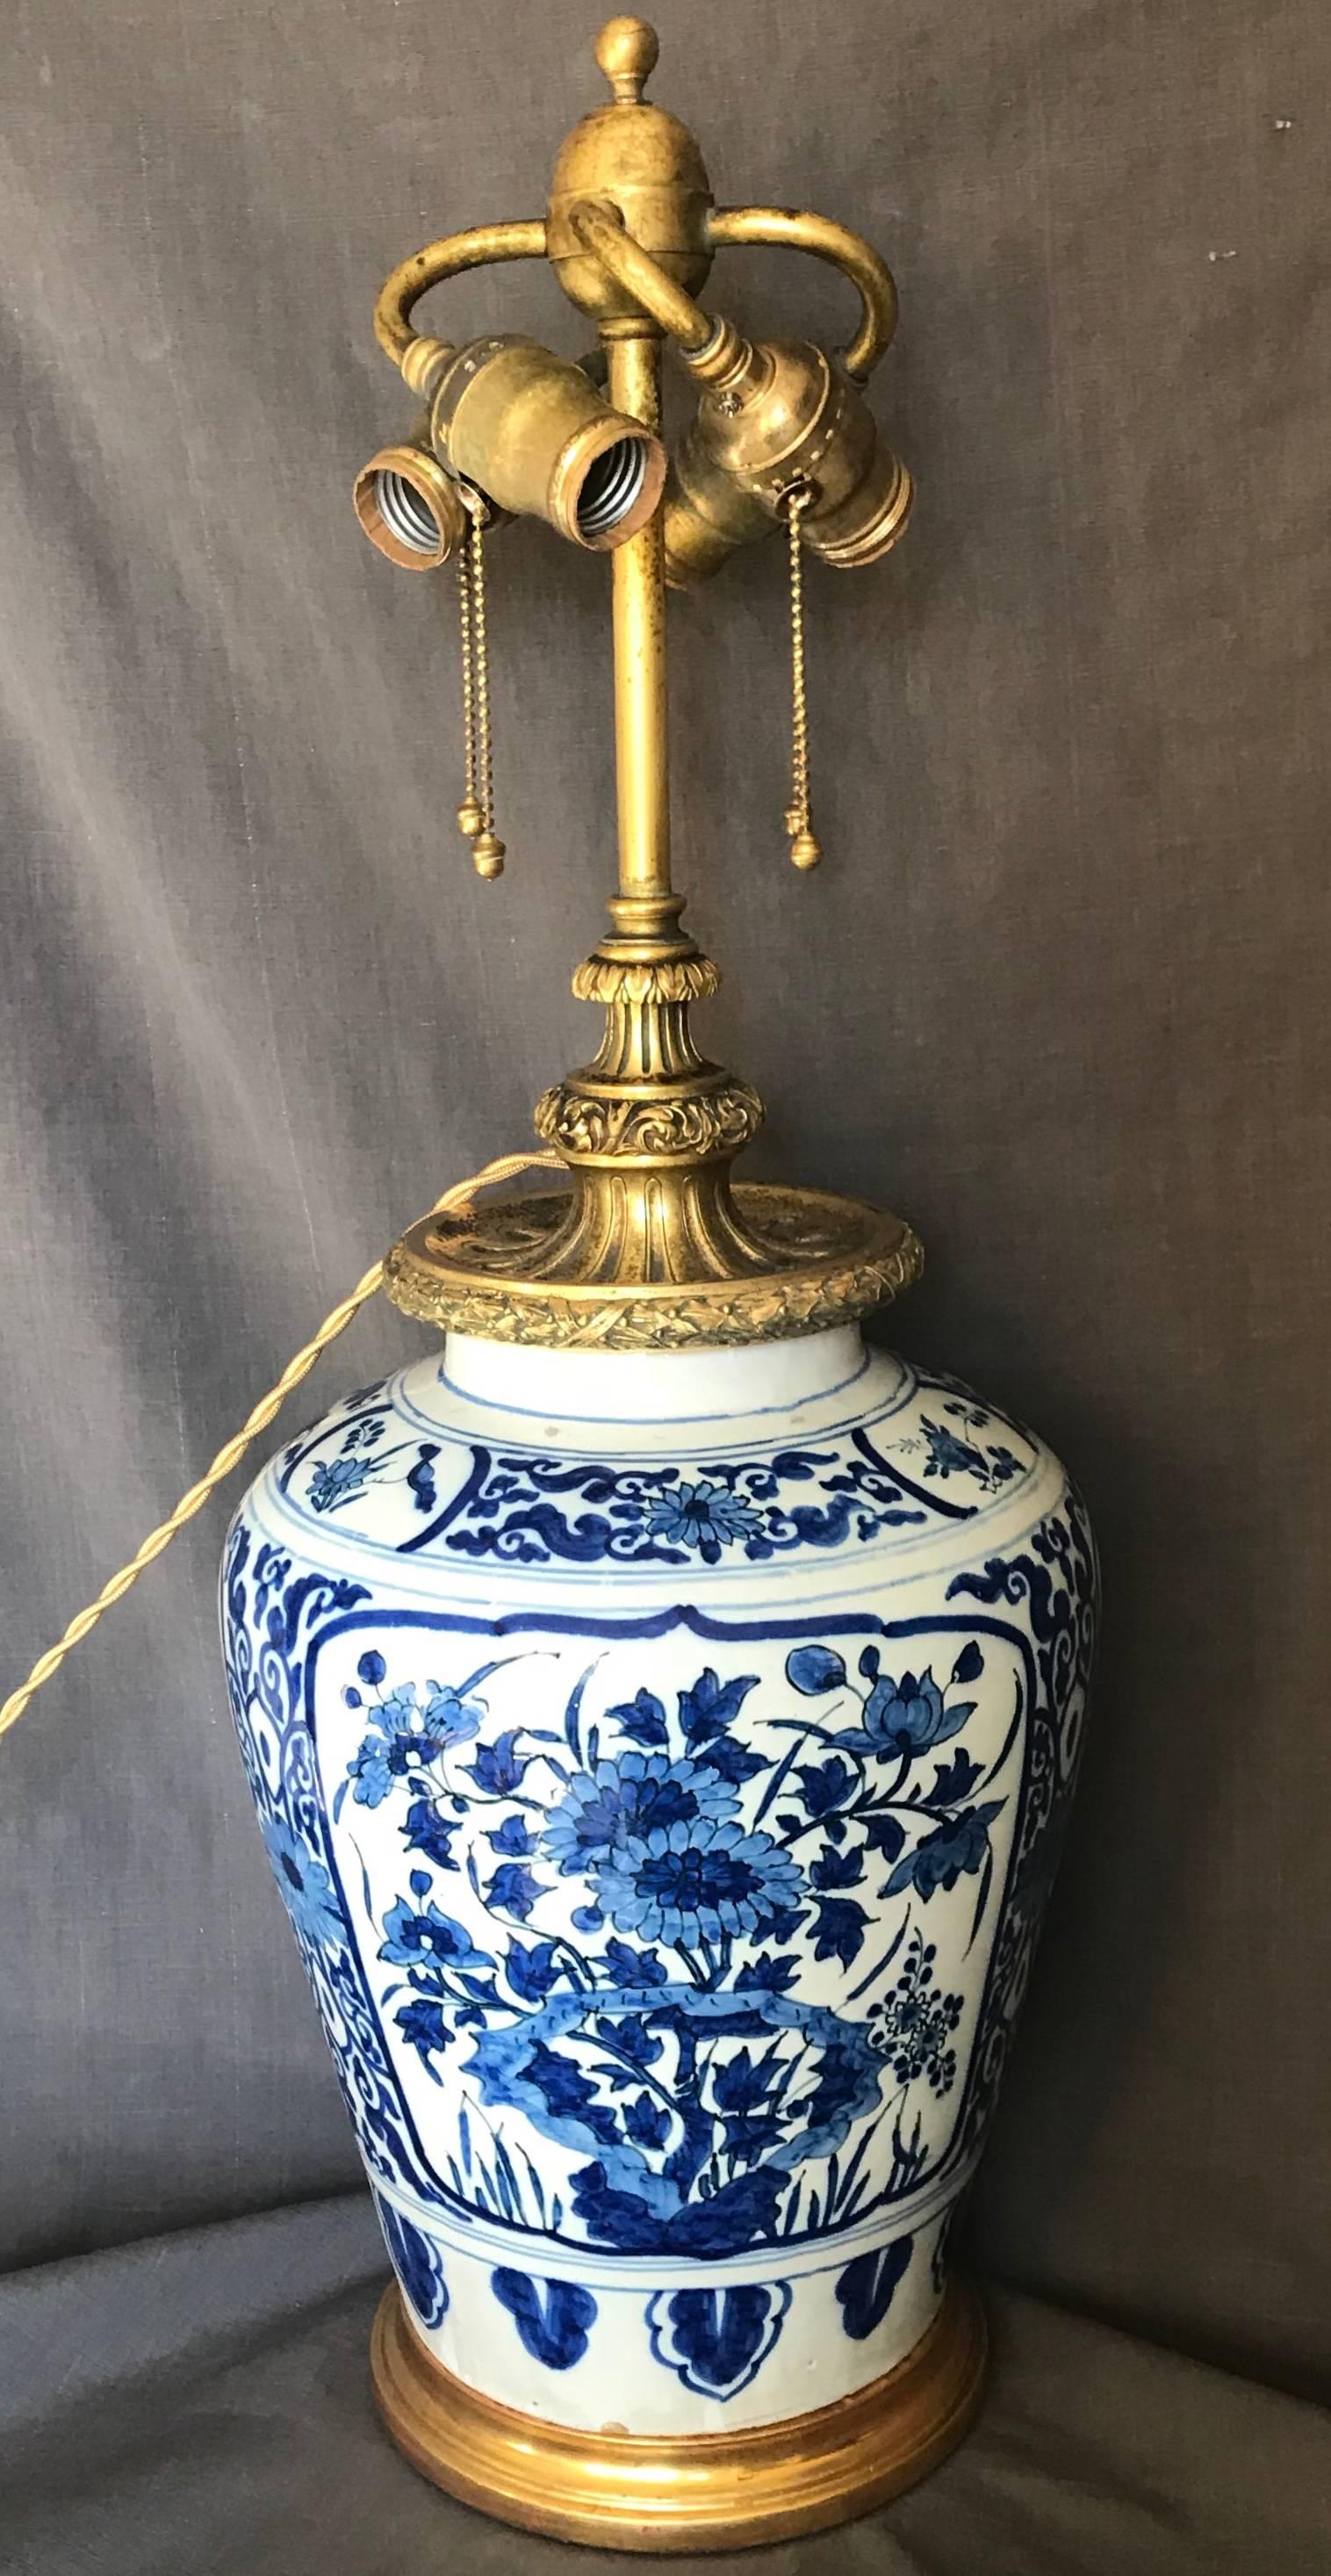 Dutch Delft blue and white lamp. Beautiful large Delft faience vase mounted as a lamp with bold floral decoration and borders with spectacular later Calder gilt bronze four-light mount on custom gilt water base. Newly electrified with gold silk